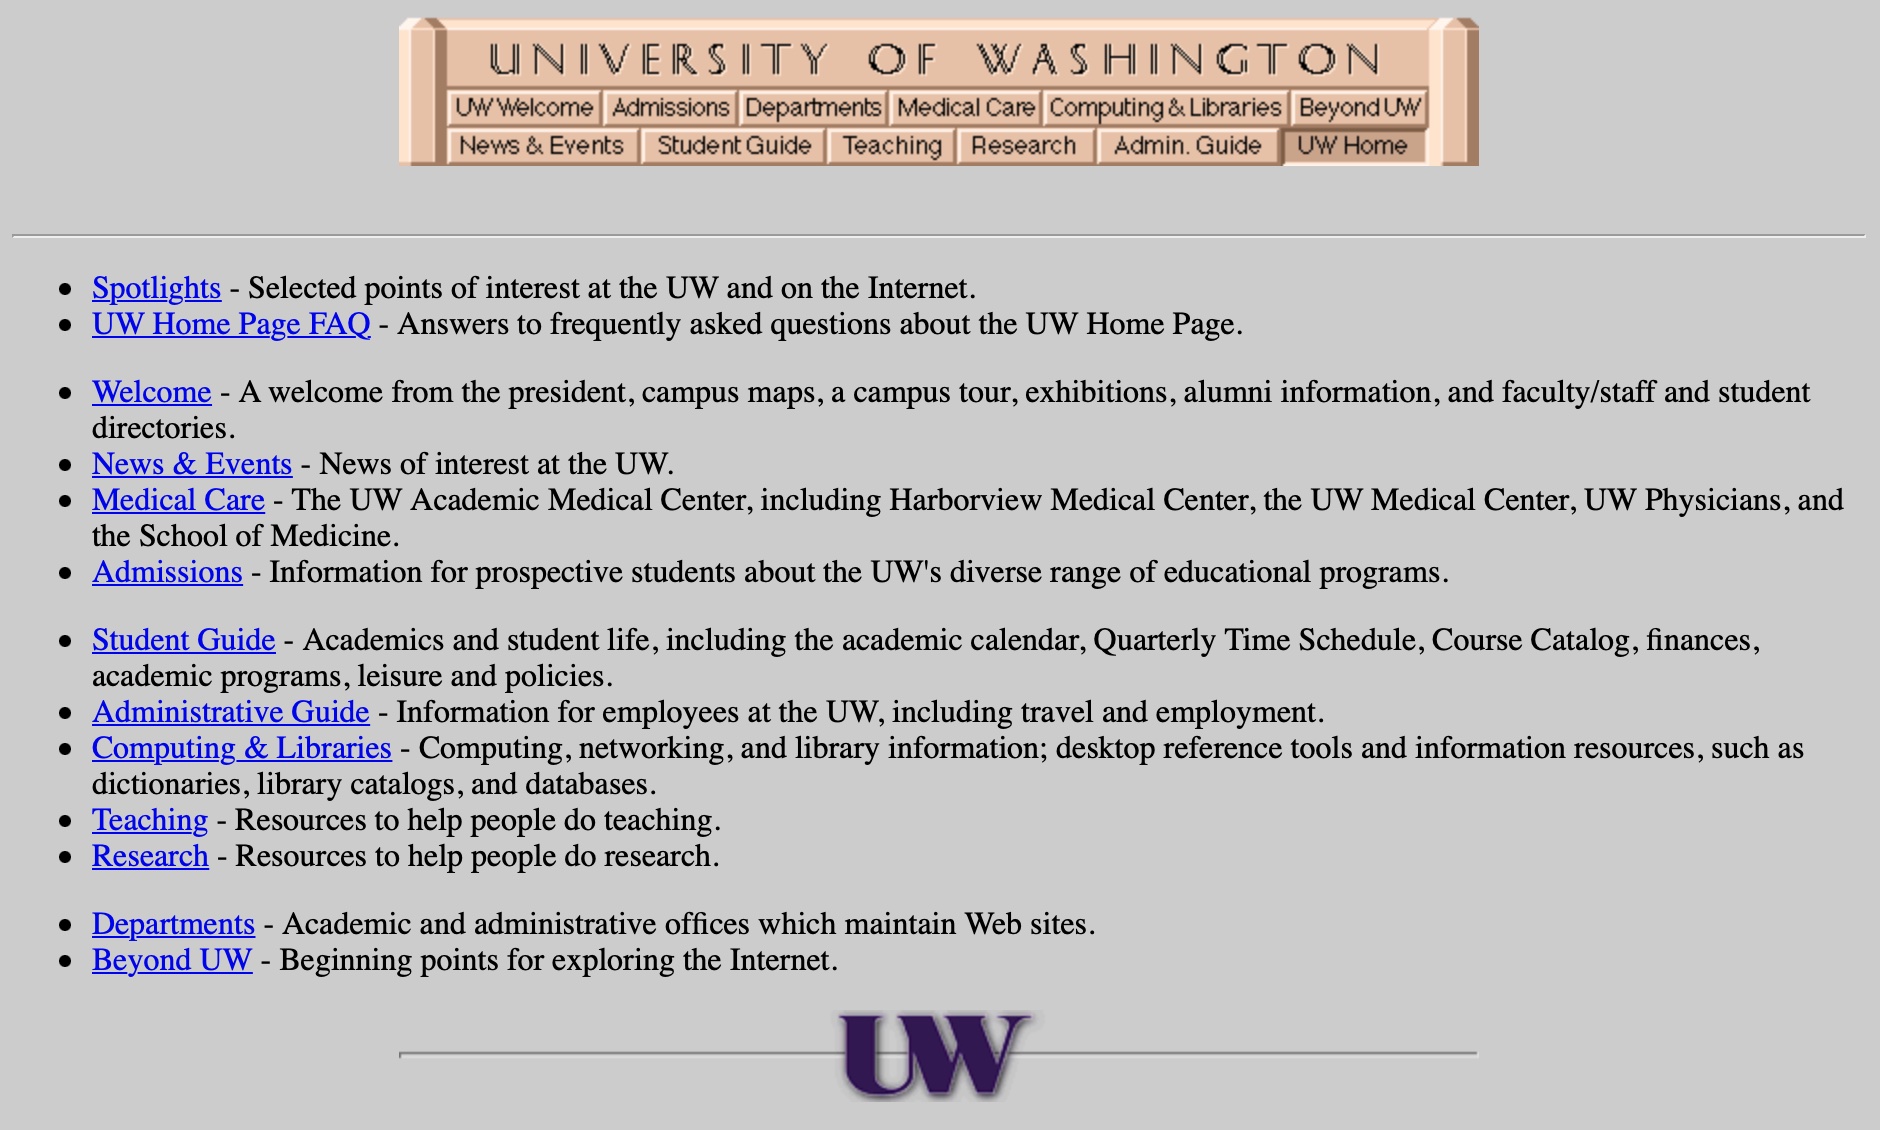 University of Washington Home Page in 1997